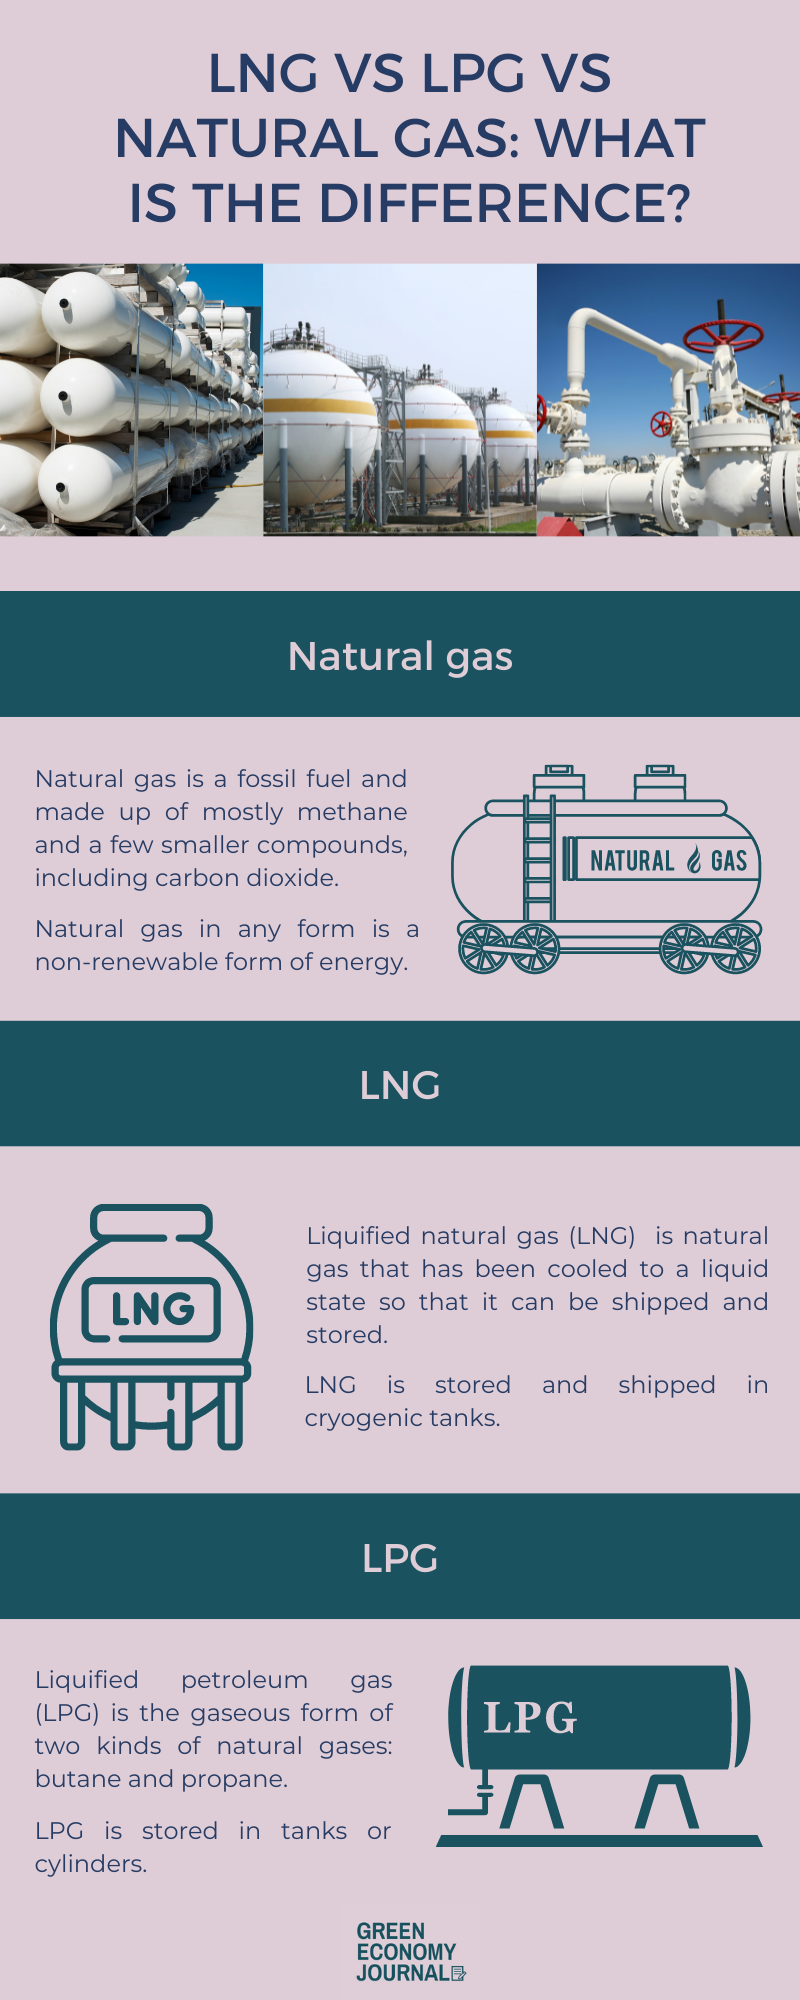 LNG vs LPG vs natural gas: What is the difference